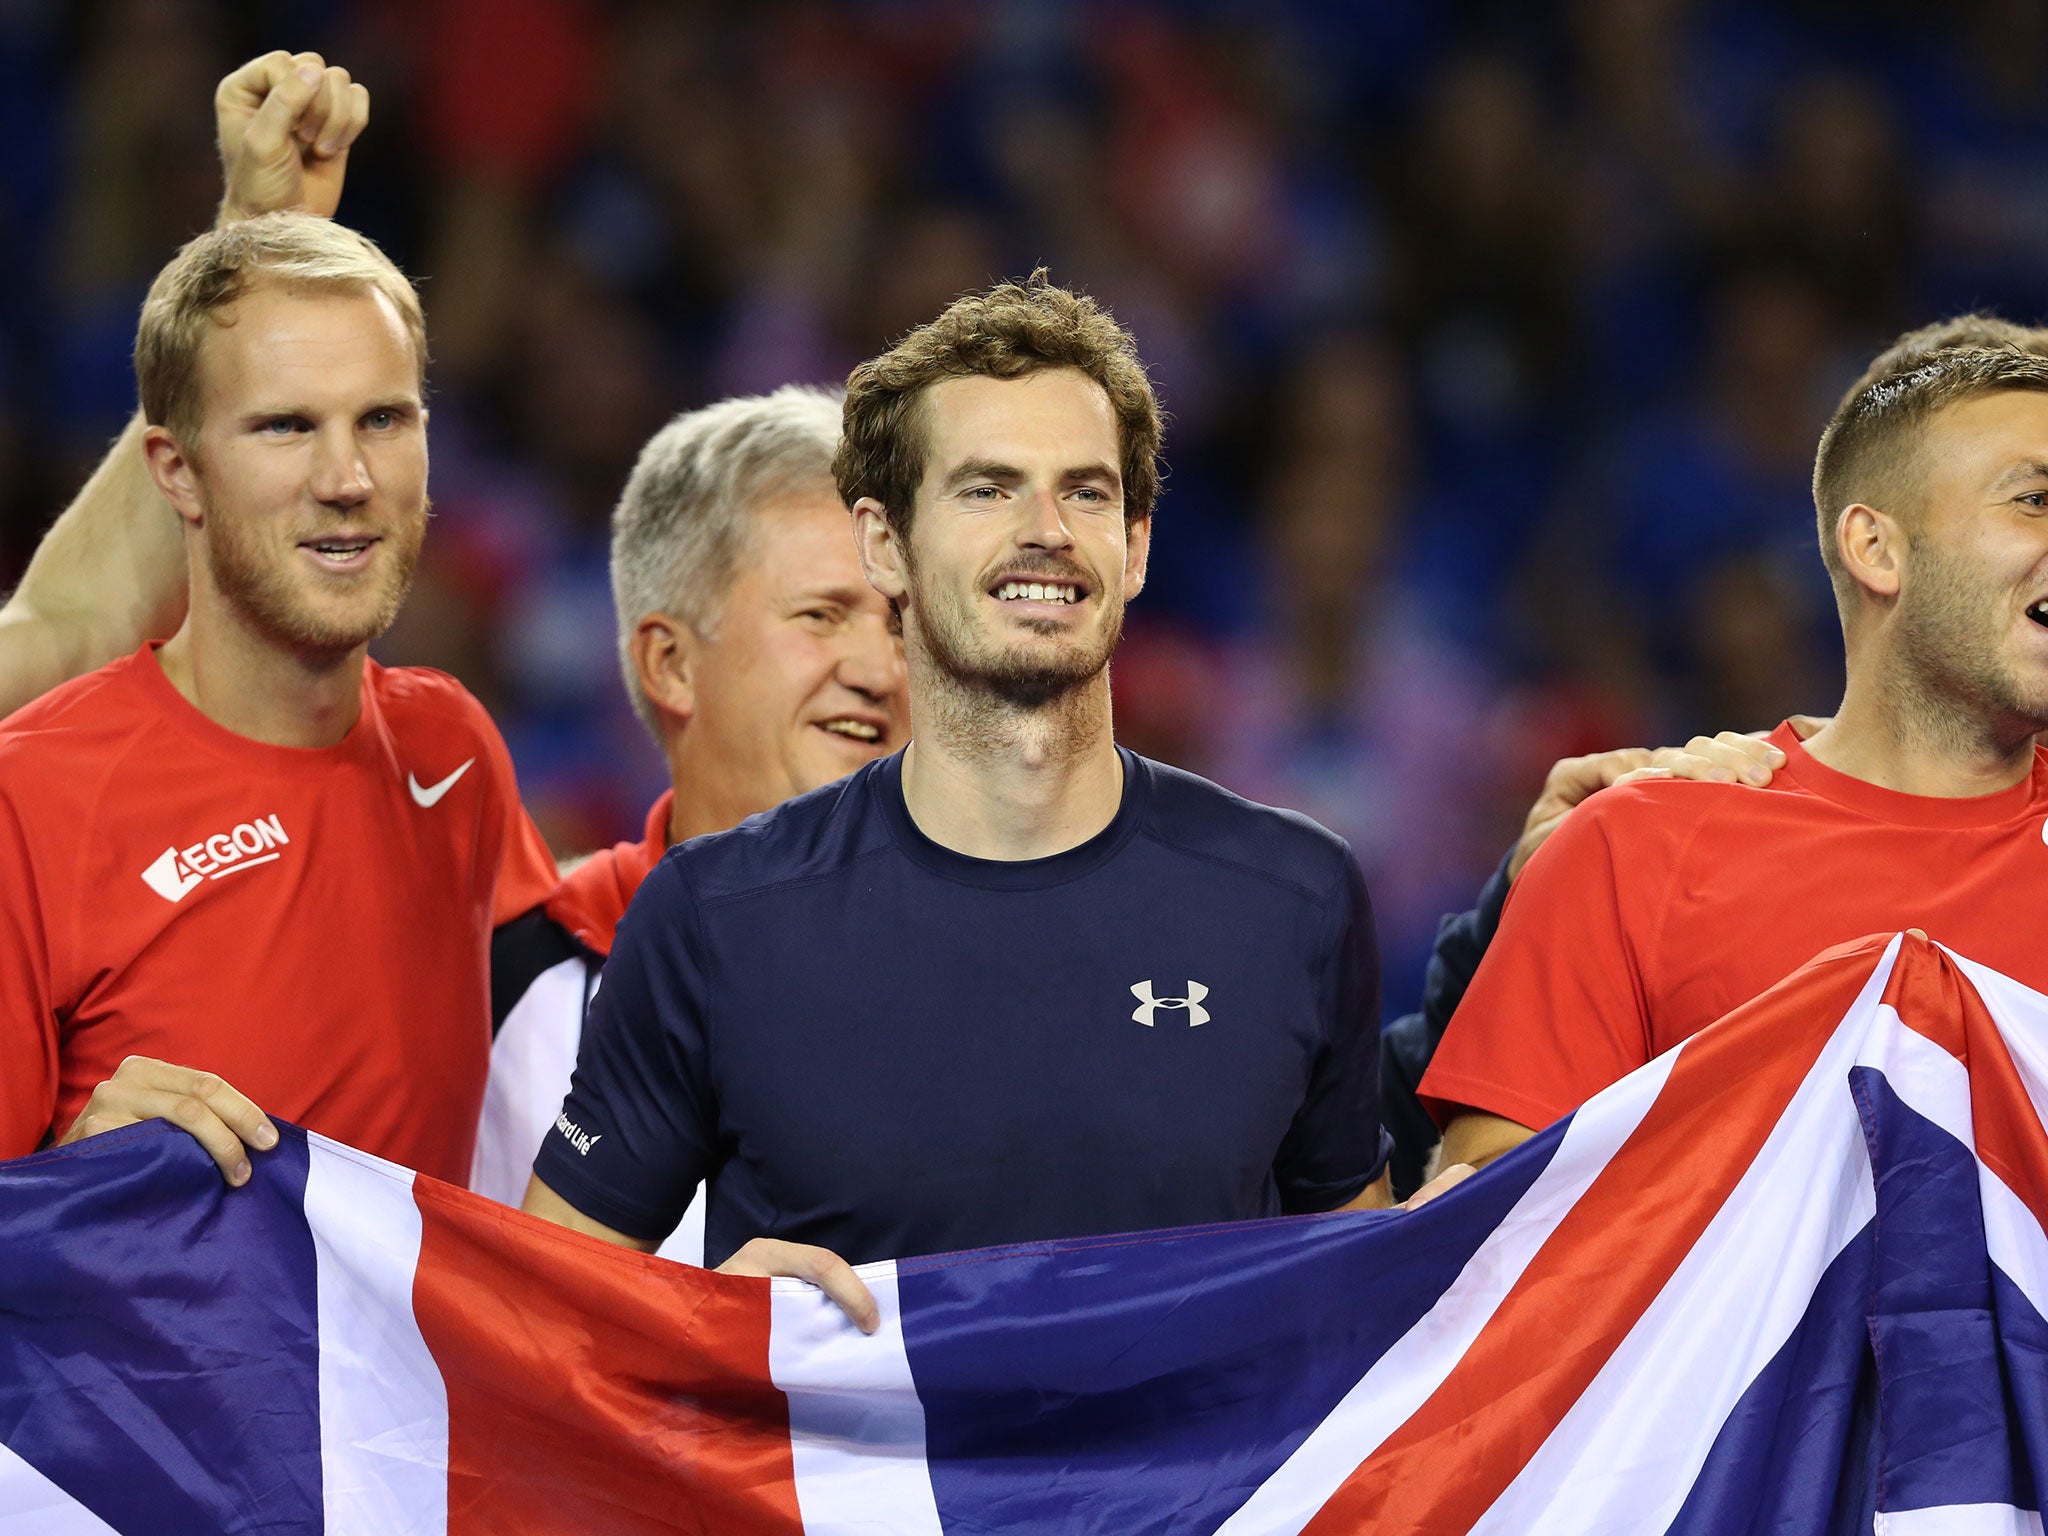 Andy Murray celebrates victory in the Davis Cup